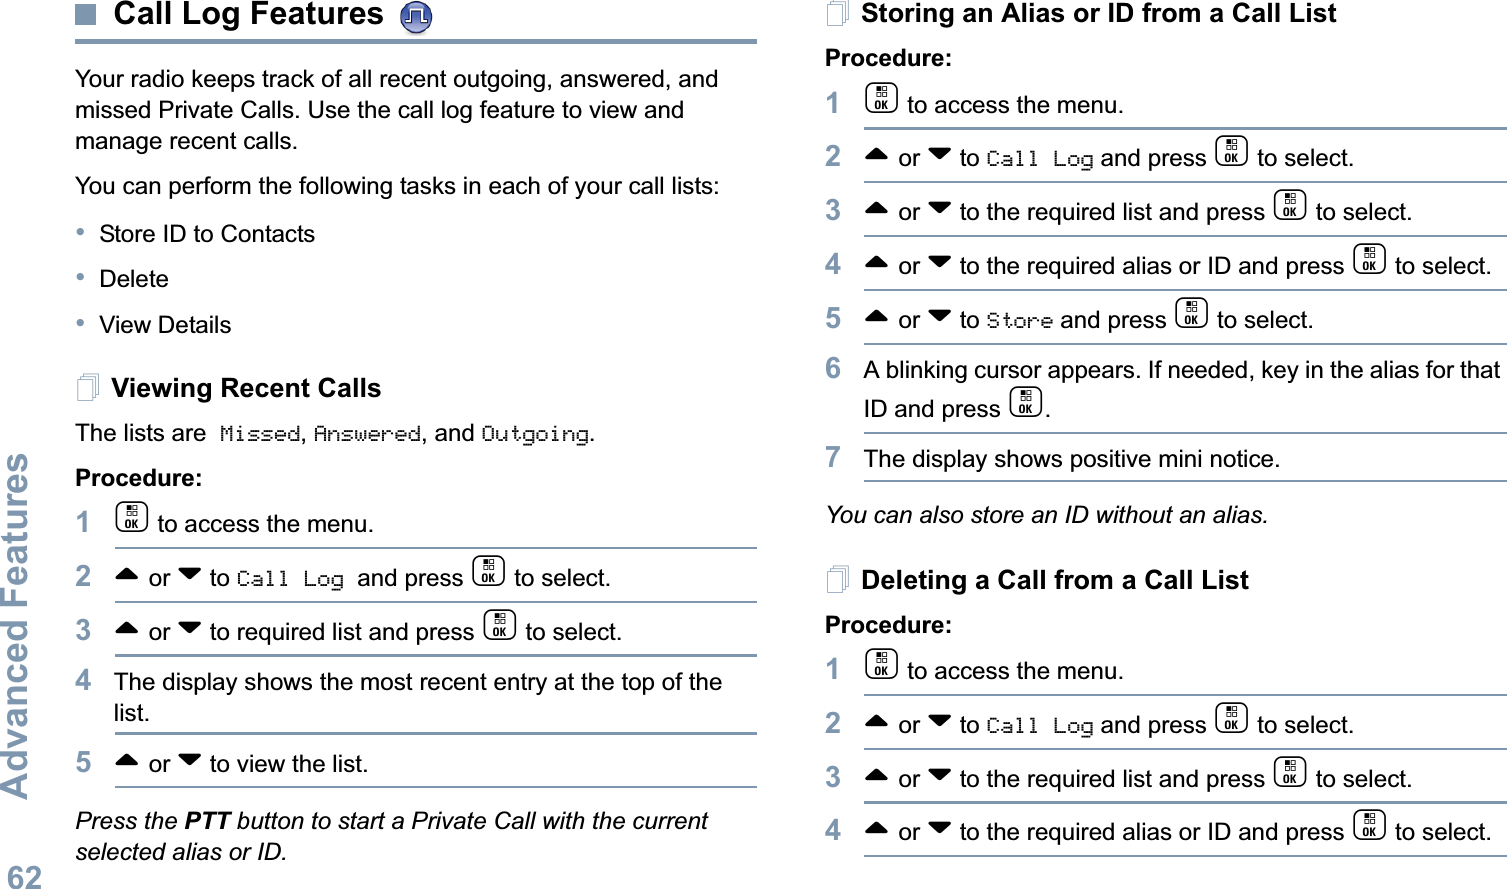 Advanced FeaturesEnglish62Call Log Features Your radio keeps track of all recent outgoing, answered, and missed Private Calls. Use the call log feature to view and manage recent calls.You can perform the following tasks in each of your call lists:•Store ID to Contacts•Delete•View DetailsViewing Recent CallsThe lists are Missed, Answered, and Outgoing.Procedure:1c to access the menu.2^ or v to Call Log and press c to select.3^ or v to required list and press c to select.4The display shows the most recent entry at the top of the list.5^ or v to view the list.Press the PTT button to start a Private Call with the current selected alias or ID.Storing an Alias or ID from a Call ListProcedure:1c to access the menu.2^ or v to Call Log and press c to select.3^ or v to the required list and press c to select.4^ or v to the required alias or ID and press c to select.5^ or v to Store and press c to select.6A blinking cursor appears. If needed, key in the alias for that ID and press c.7The display shows positive mini notice.You can also store an ID without an alias.Deleting a Call from a Call ListProcedure:1c to access the menu.2^ or v to Call Log and press c to select.3^ or v to the required list and press c to select.4^ or v to the required alias or ID and press c to select.